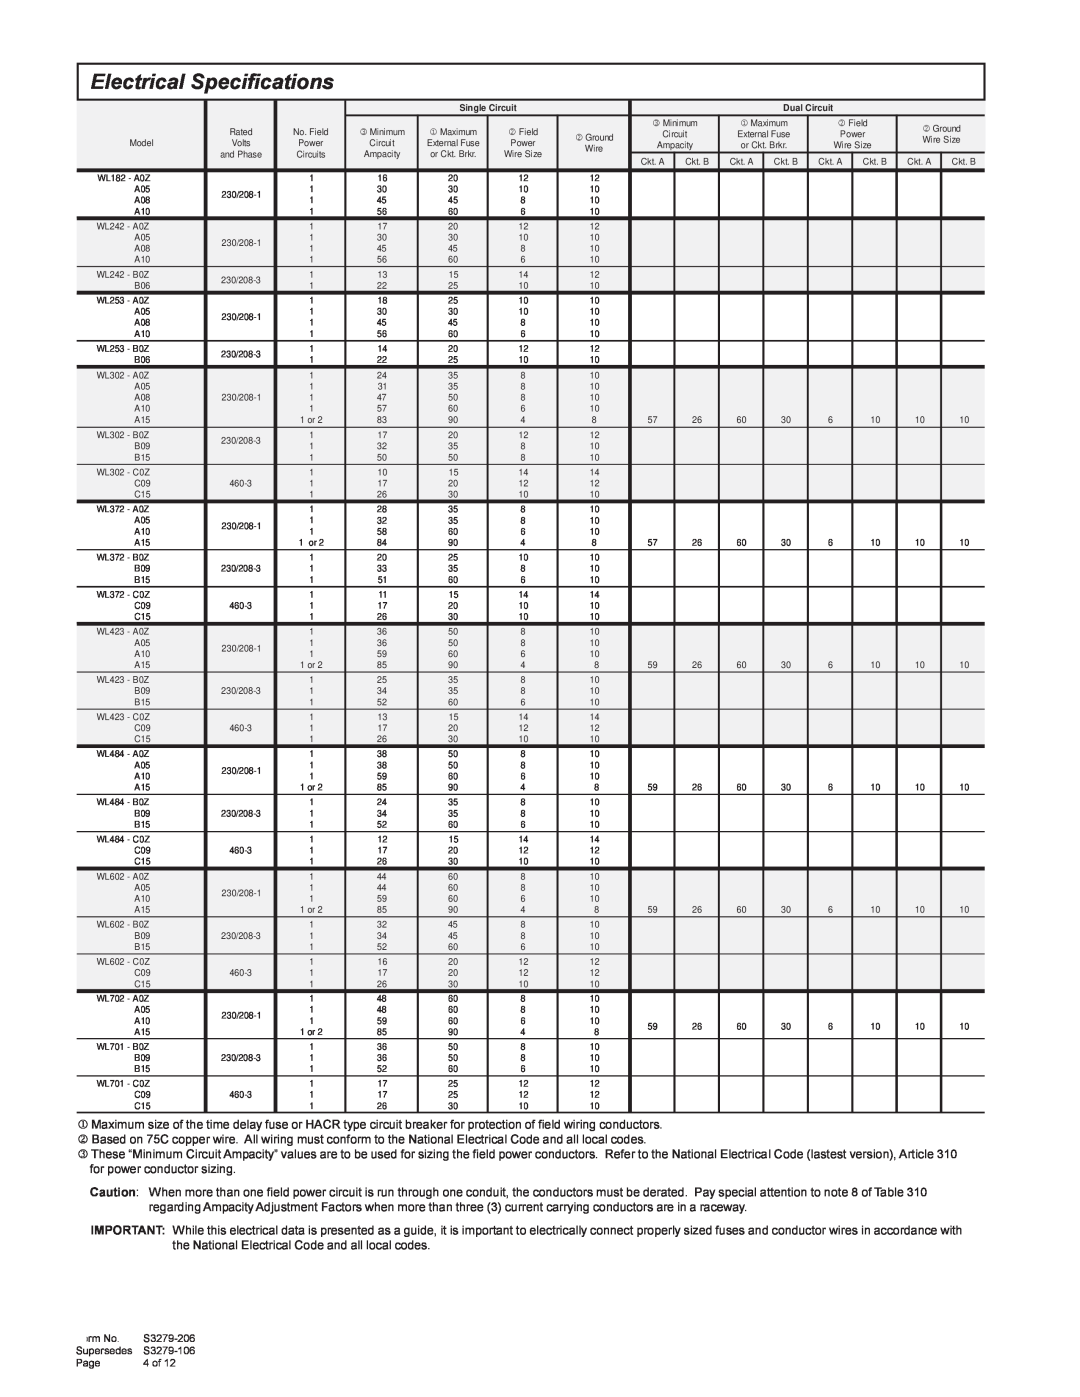 Bard 357-93-E manual Electrical Specifications, Form No, S3279-206, Supersedes, S3279-106, Page, 4 of 